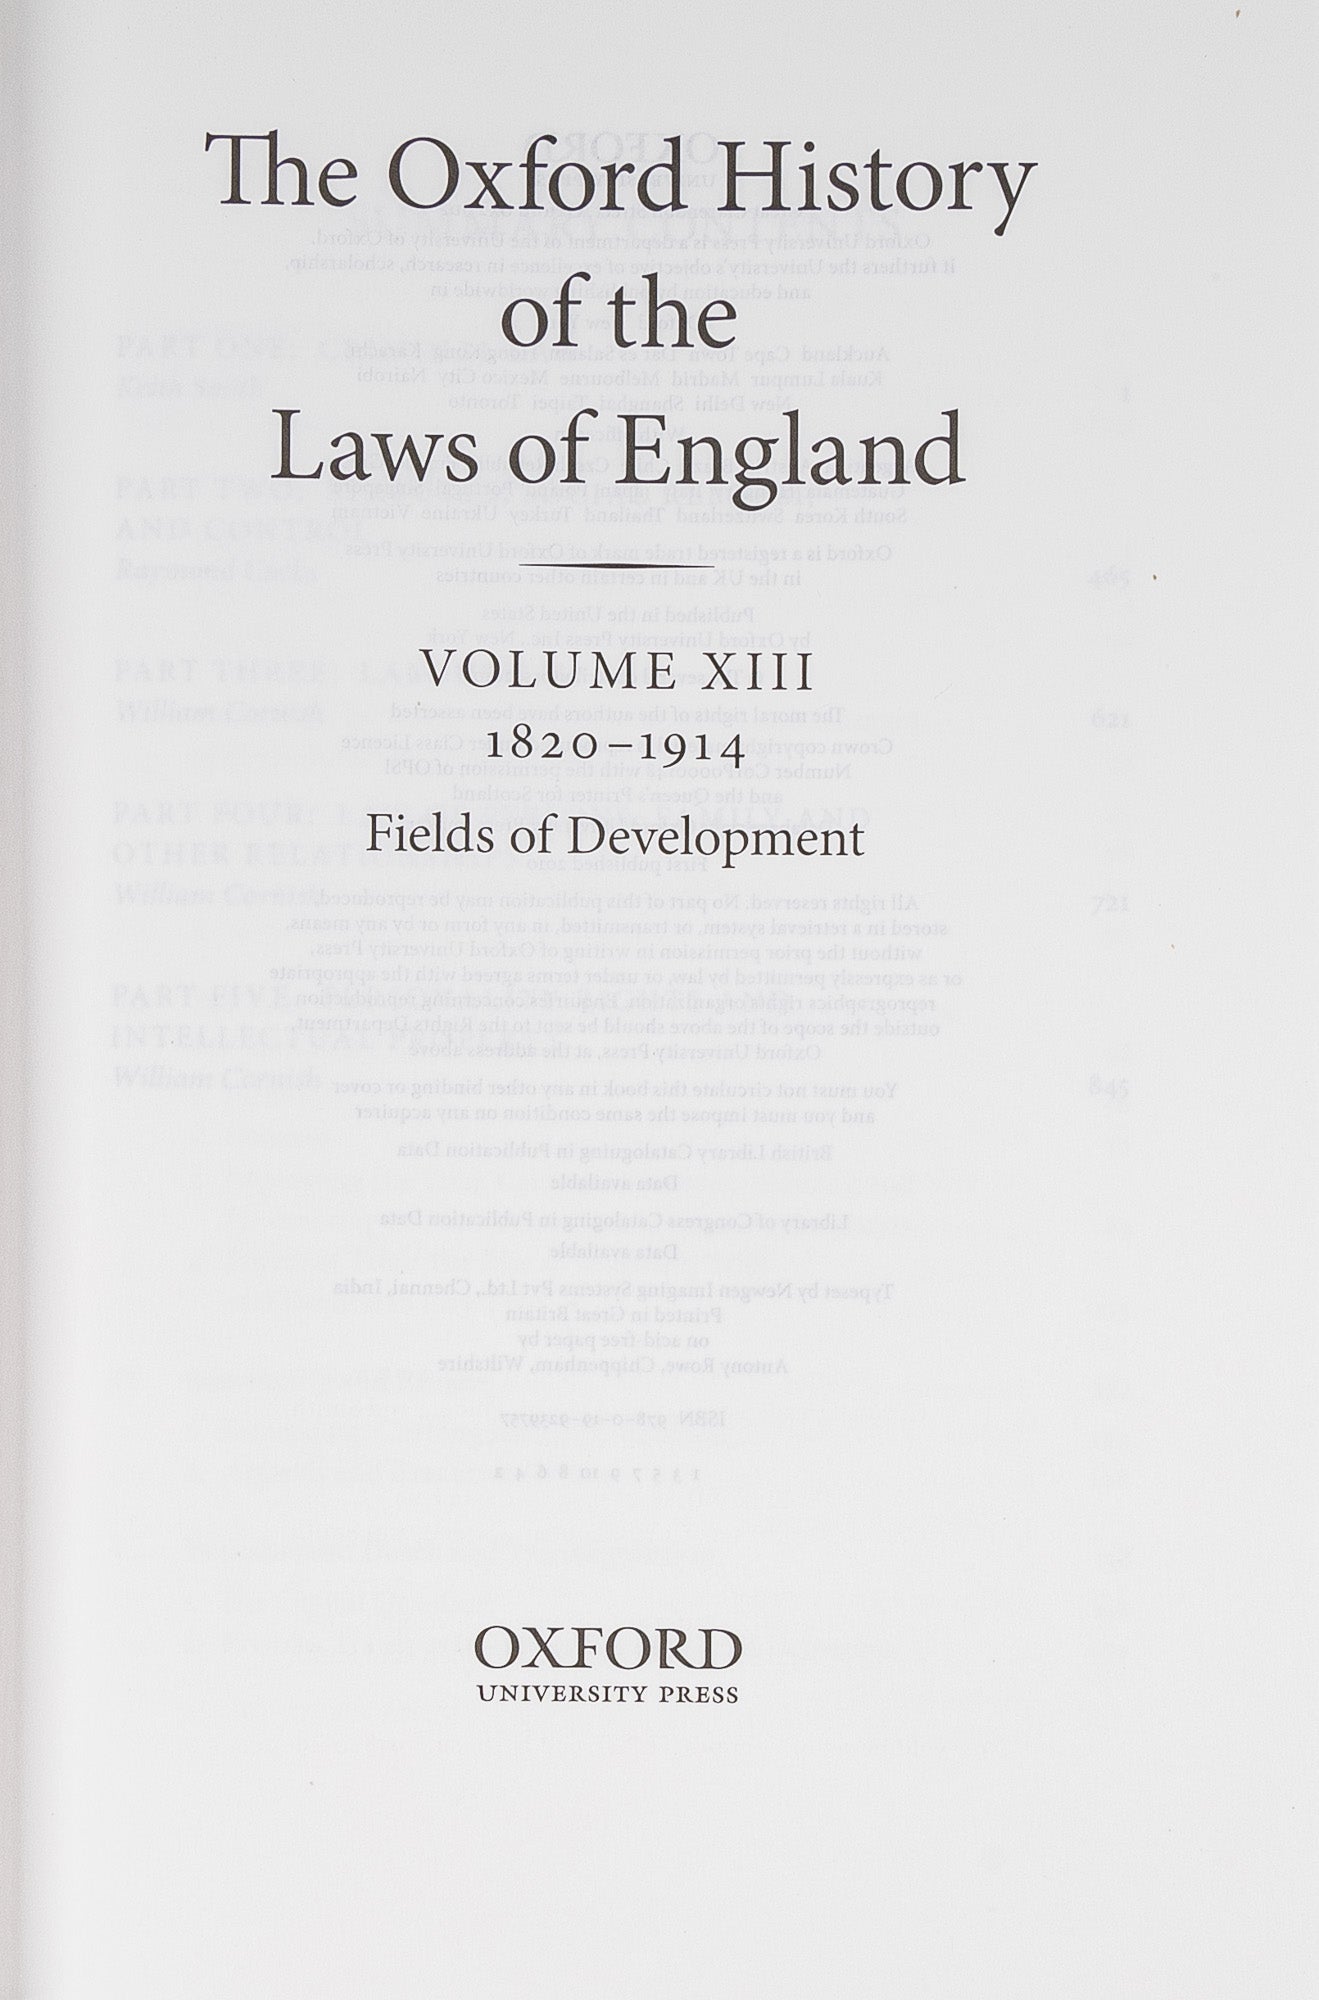 The Oxford History of the Laws of England: Volumes XI, XII, and XIII by Wm  Cornish, J. S Anderson, R. Cocks, M. on The Lawbook Exchange, Ltd